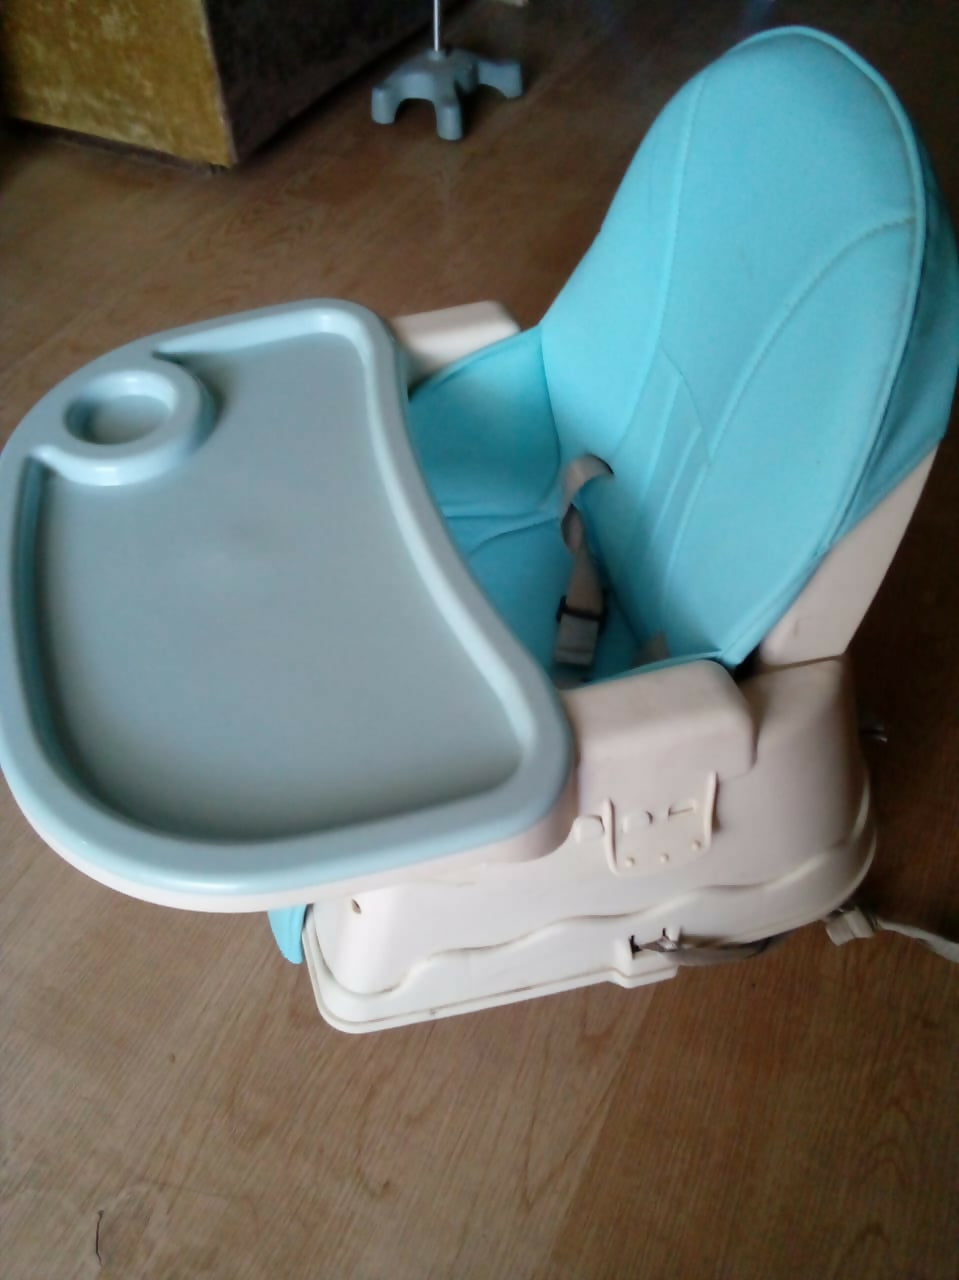 Enhance mealtime with the STAR AND DAISY Baby High Chair, featuring adjustable height, recline positions, and a safety harness for comfort and convenience.